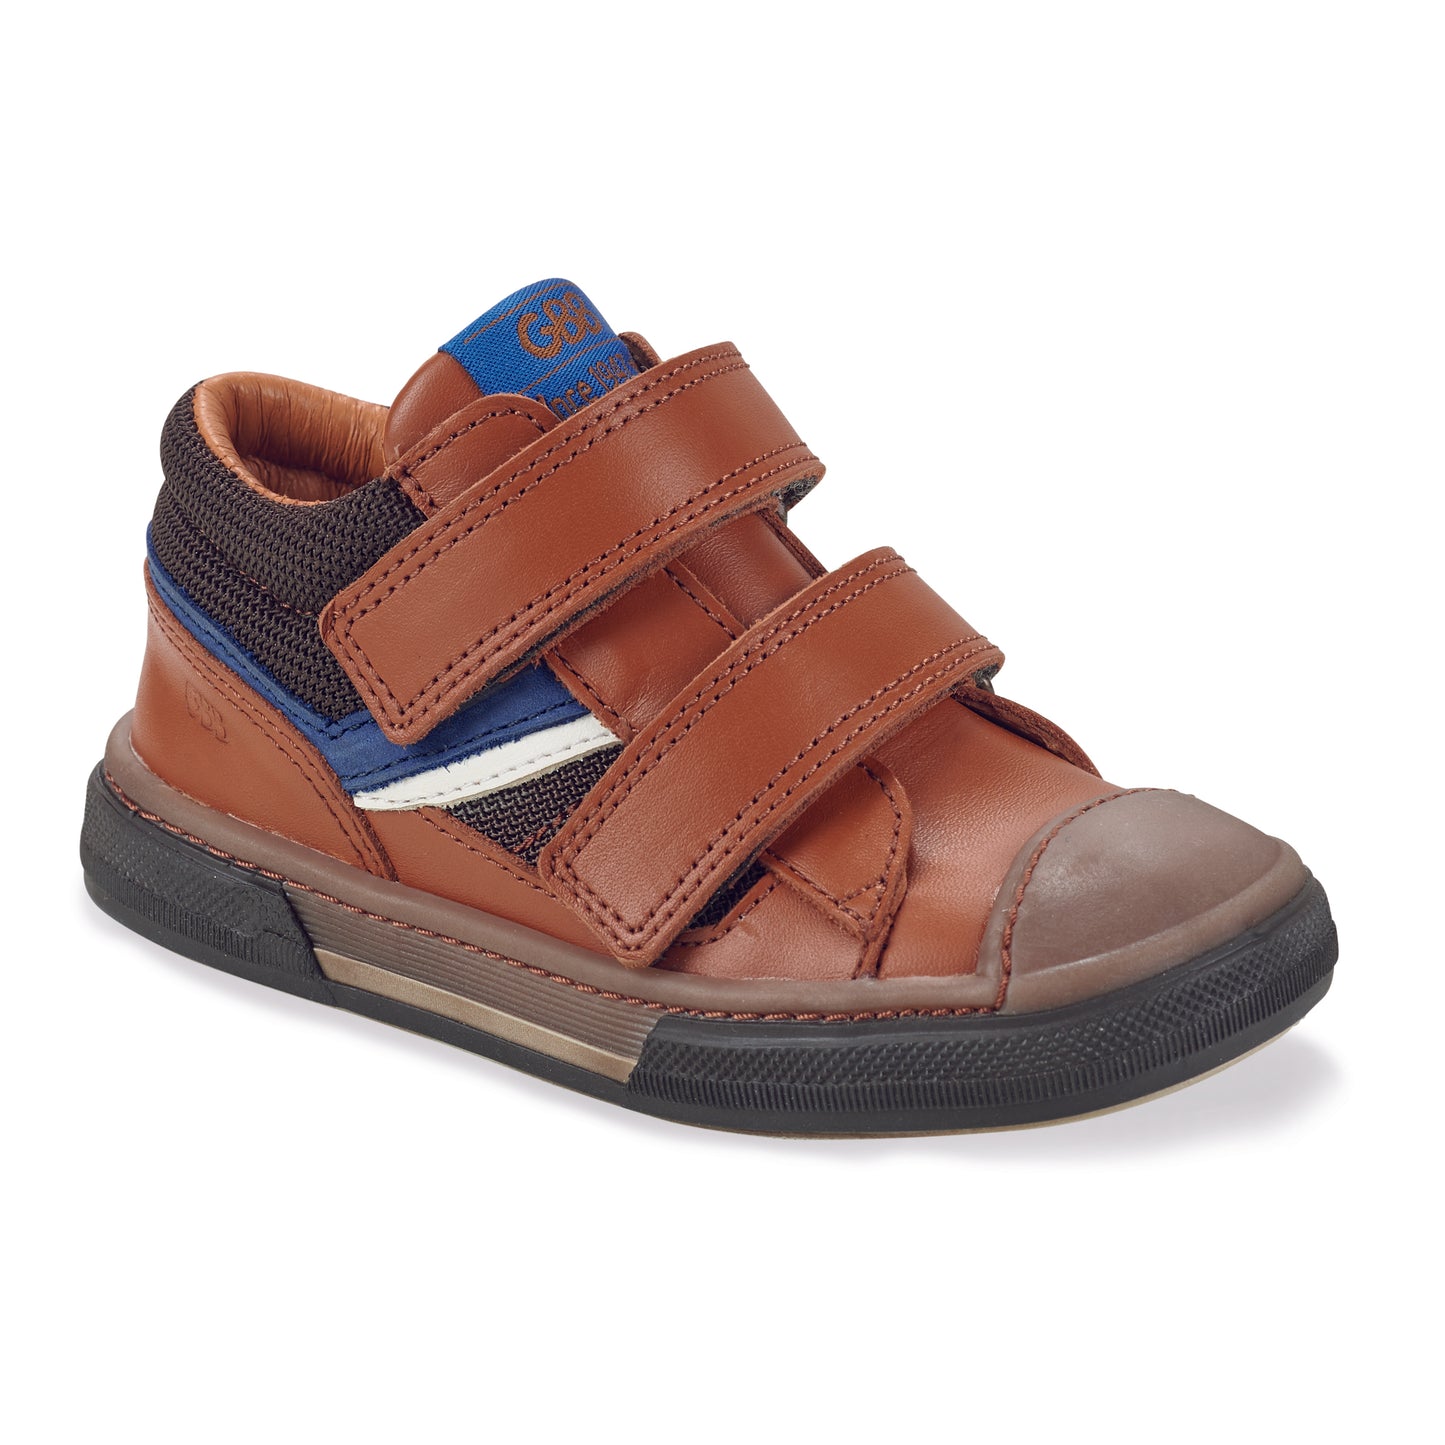 GBB VICTORIC Camel Chaussure basses basket cuir